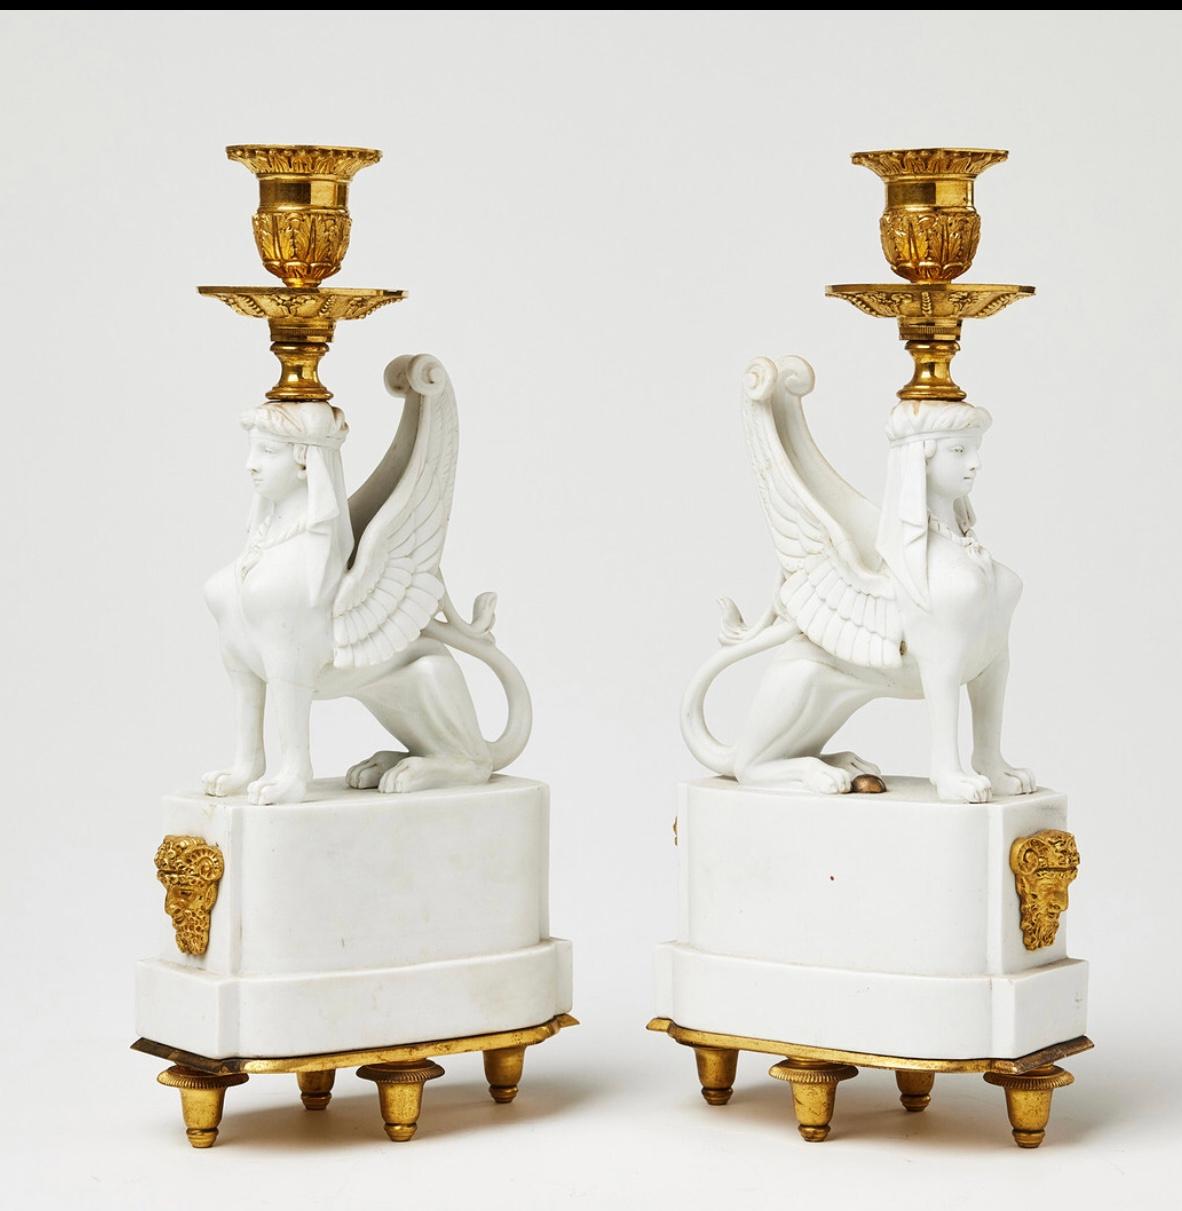 Rares pair of biscuit Sphynxes forming torches 
Adorned with gilded bronze bobèches and motifs, mounted on base with Louis XVI feet,
Variant of a pair of torches, attributed to Nast, ref. Sothebys sale
Variant of Wedgwood Sphynxes torchs 